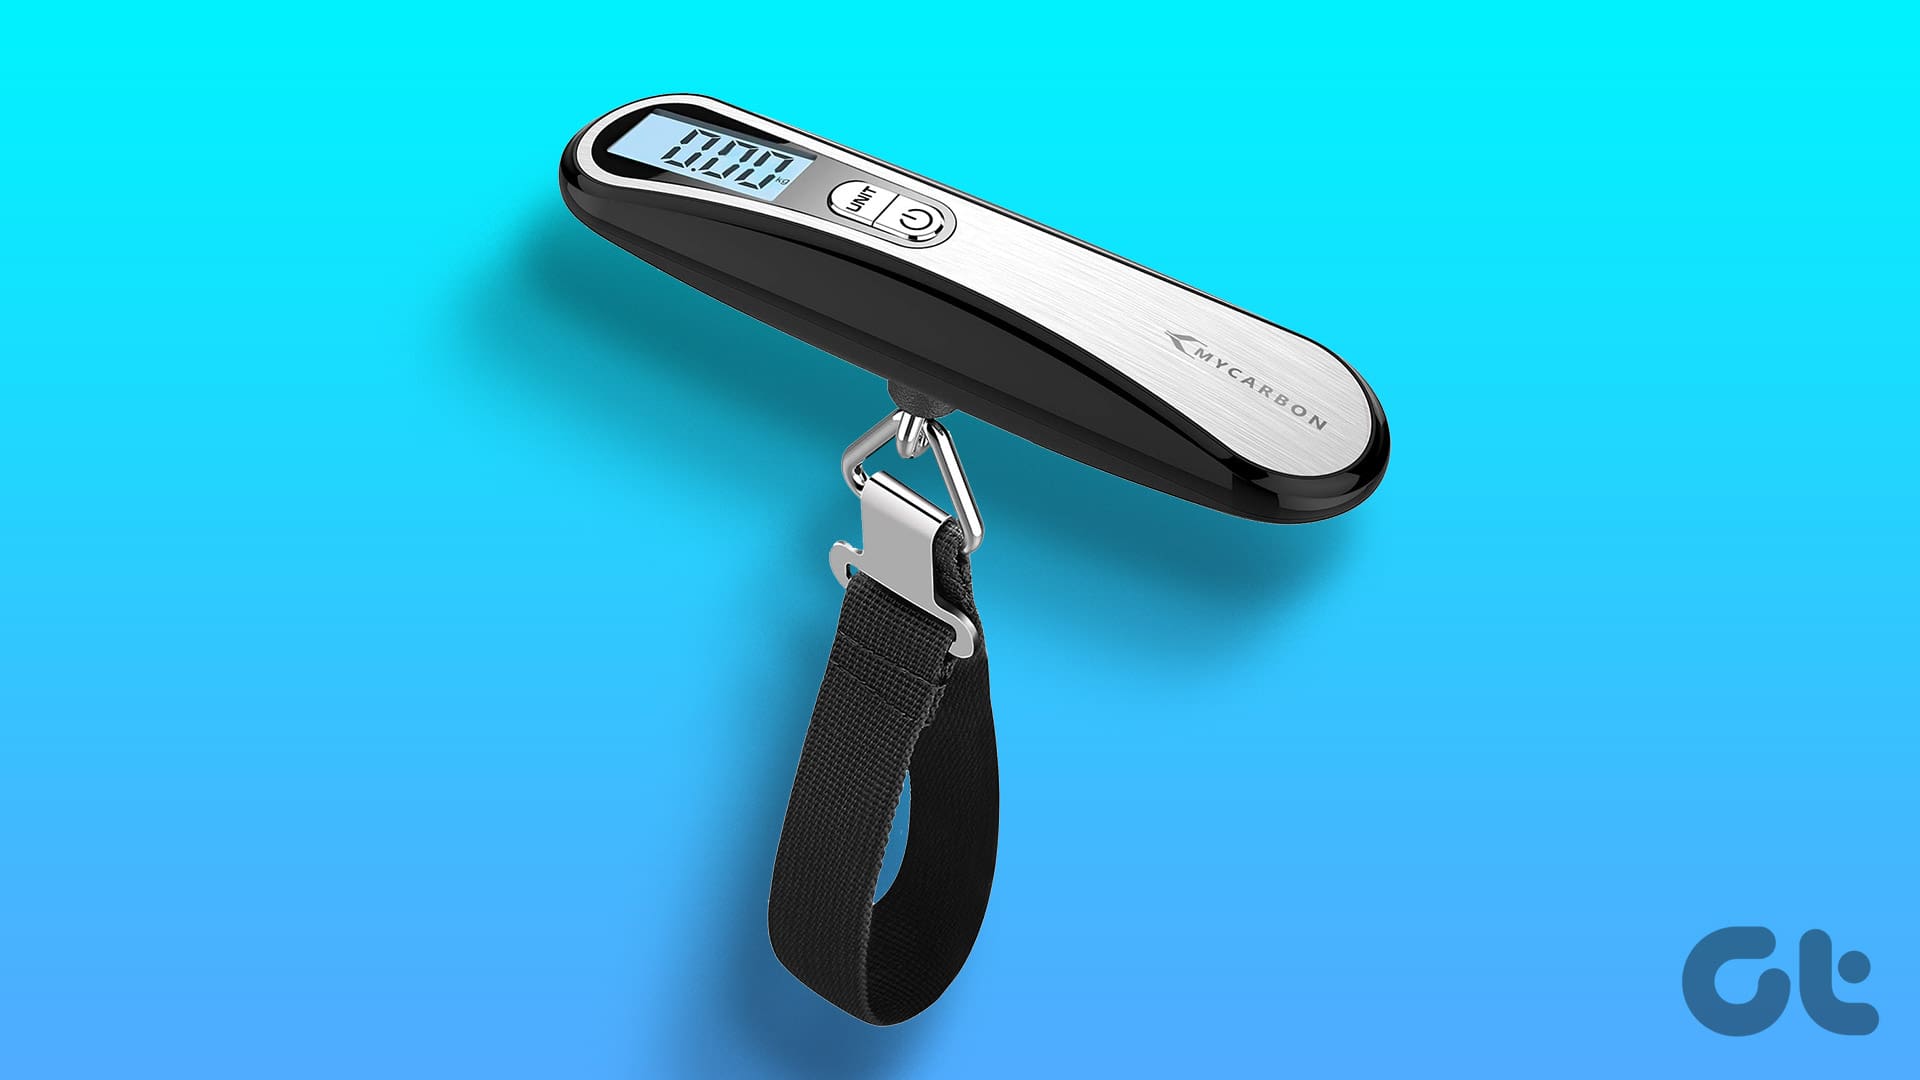 https://www.guidingtech.com/wp-content/uploads/Best_Digital_Luggage_Scales_in_the_UK.jpg